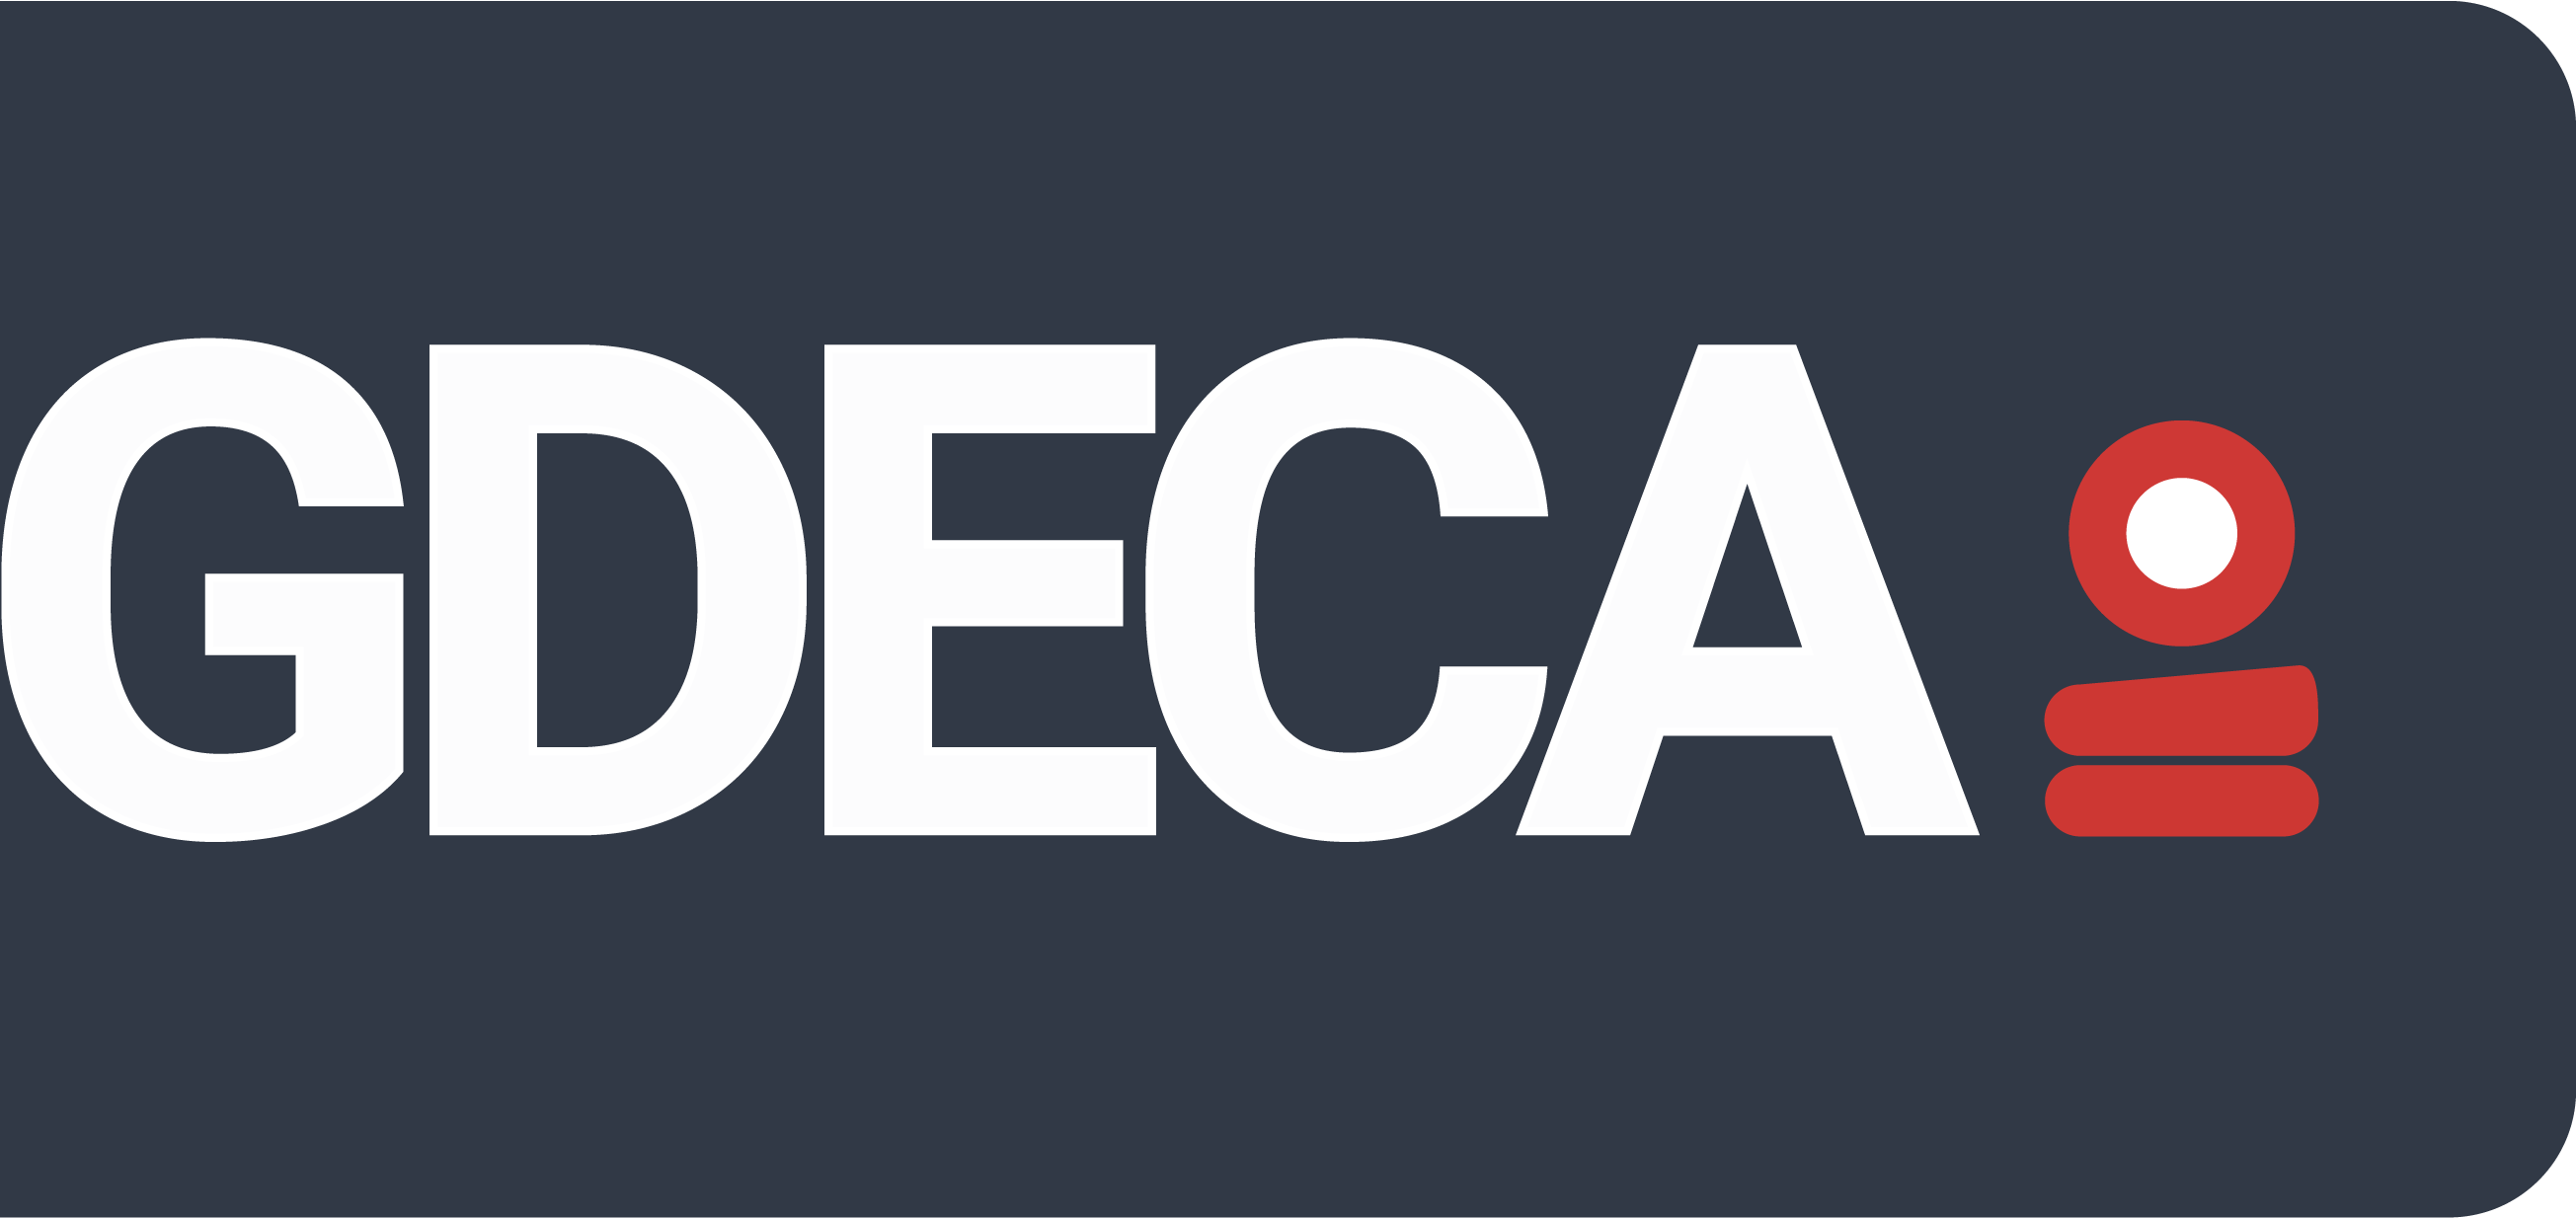 GDECA - Gender, Diversity and Equality Consulting Agency